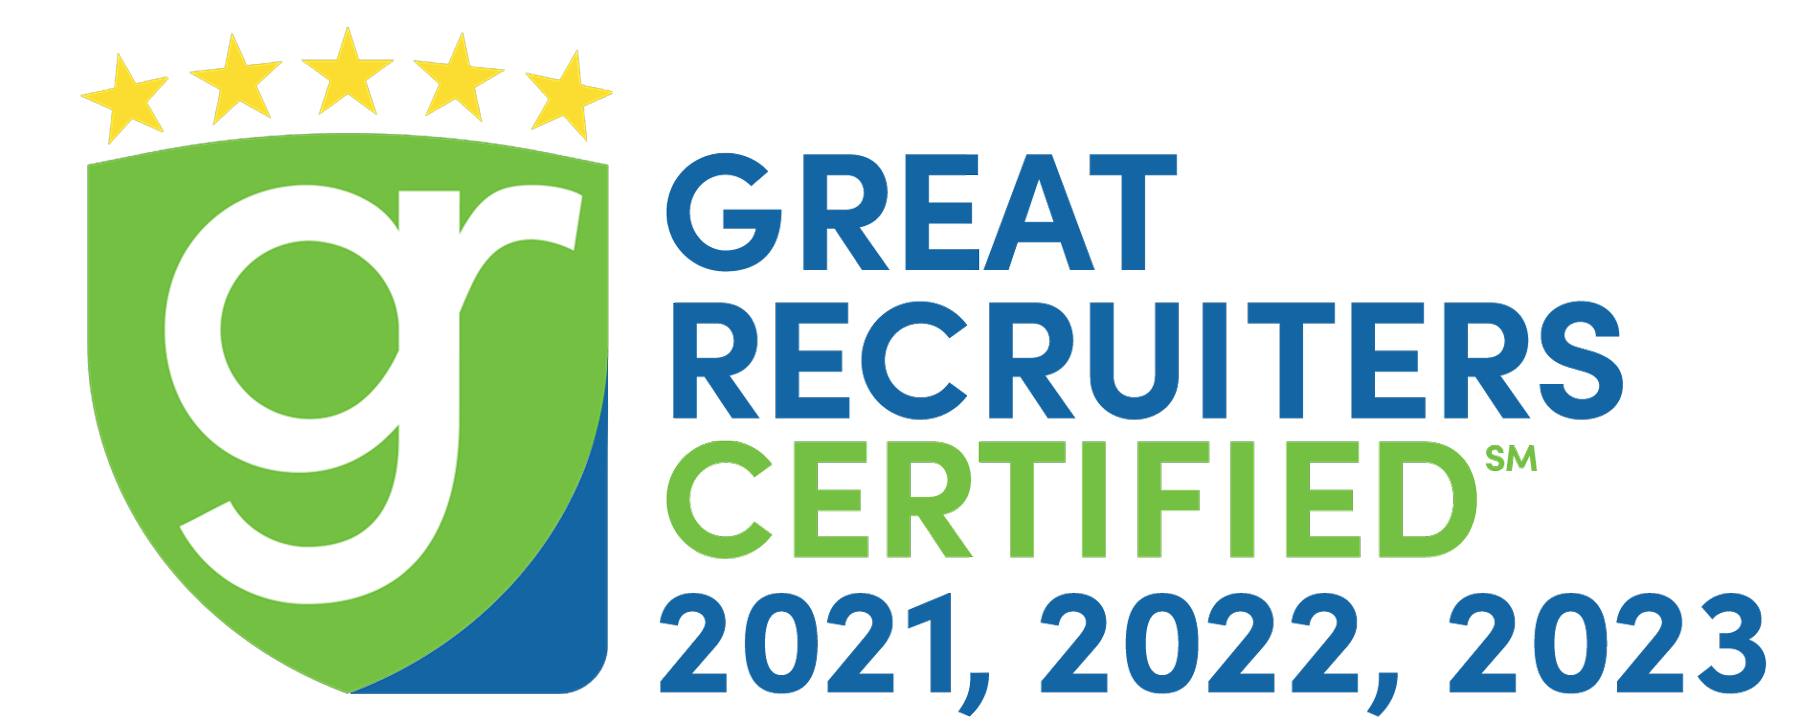 Great-Recruiters-Certified-2021-2022-and-2023-Blue